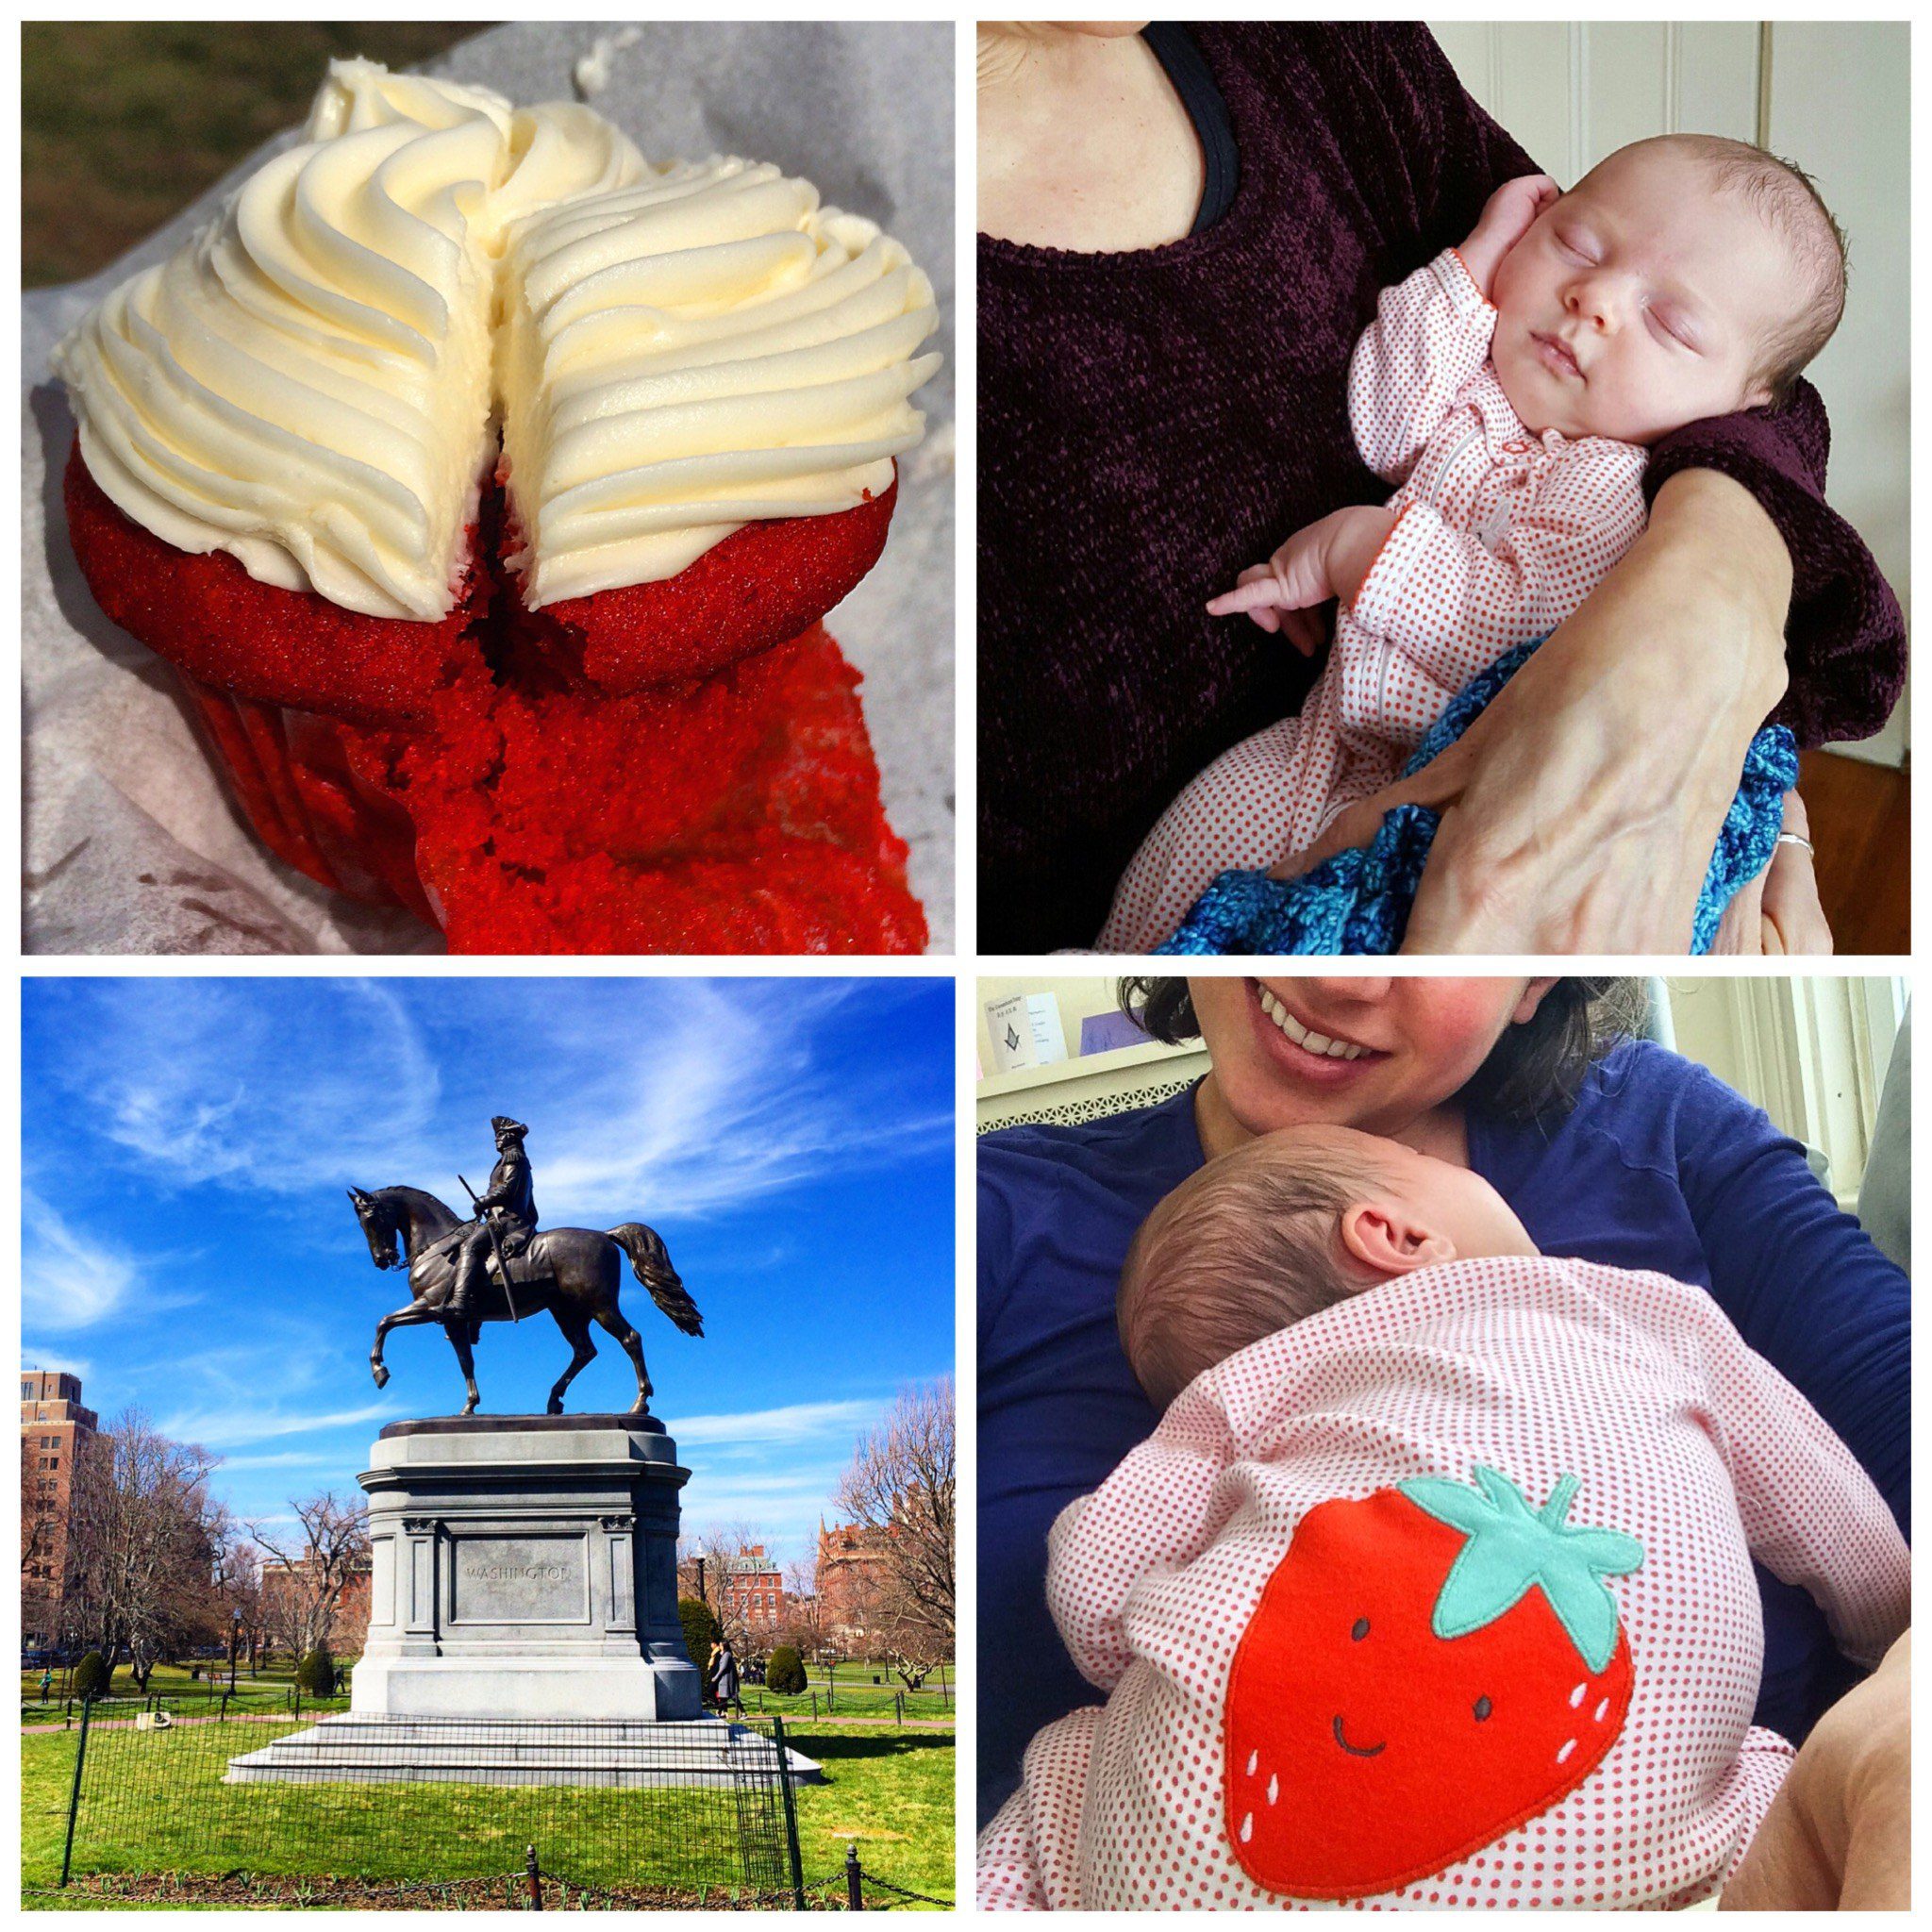 More scenes from walking and nursing around Boston: Red velvet cupcake, Joya looking sweet, the Boston Public Garden, and a strawberry rump!